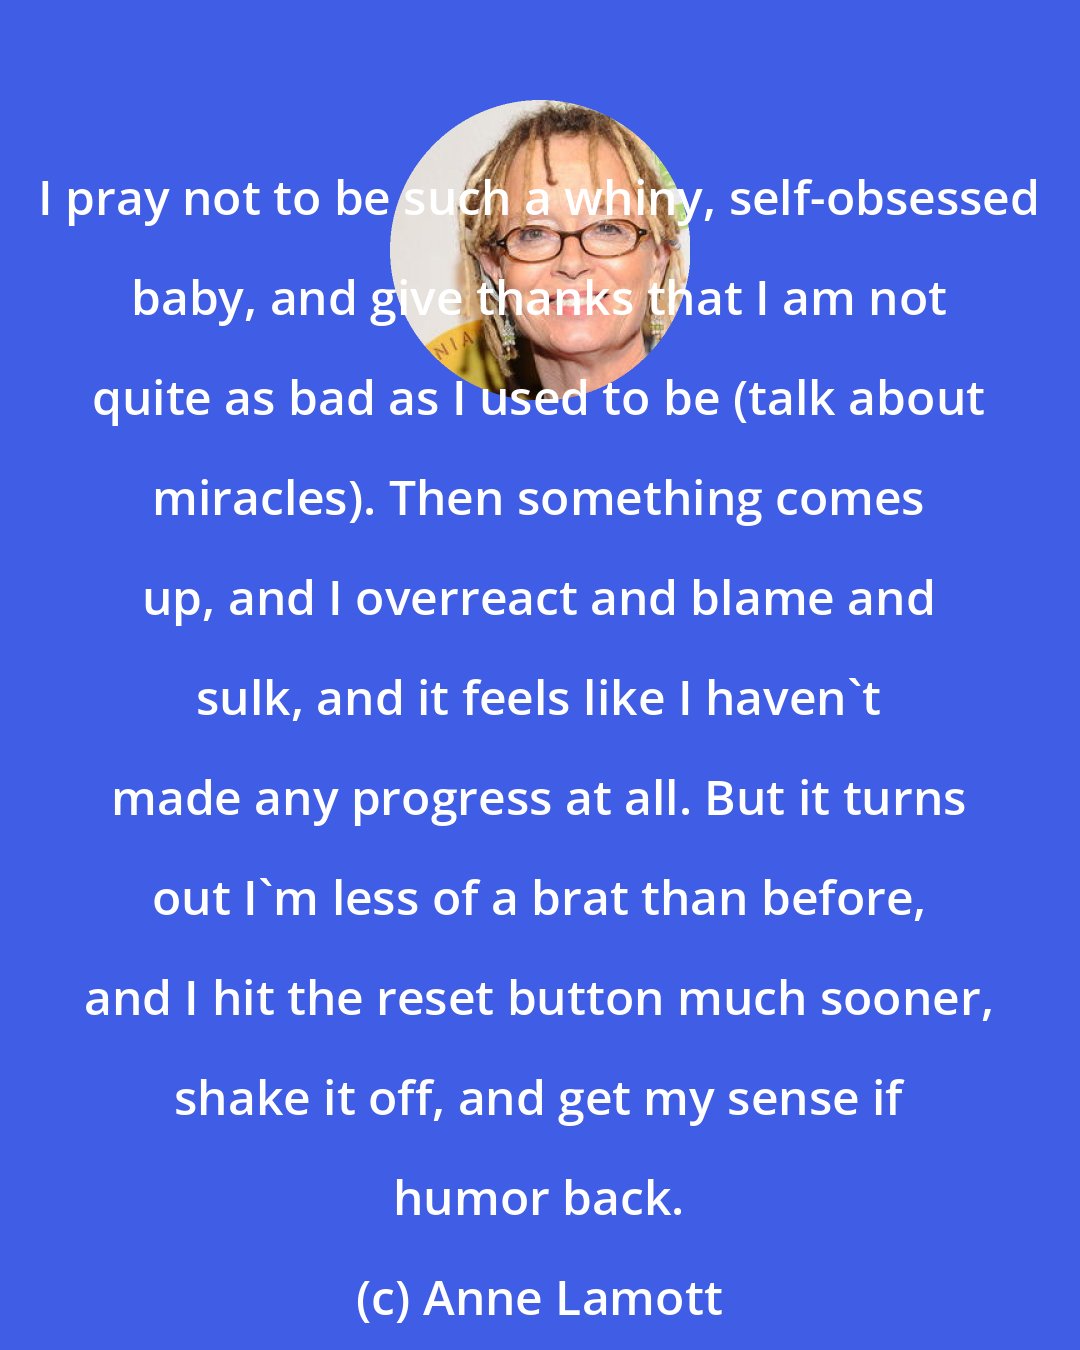 Anne Lamott: I pray not to be such a whiny, self-obsessed baby, and give thanks that I am not quite as bad as I used to be (talk about miracles). Then something comes up, and I overreact and blame and sulk, and it feels like I haven't made any progress at all. But it turns out I'm less of a brat than before, and I hit the reset button much sooner, shake it off, and get my sense if humor back.